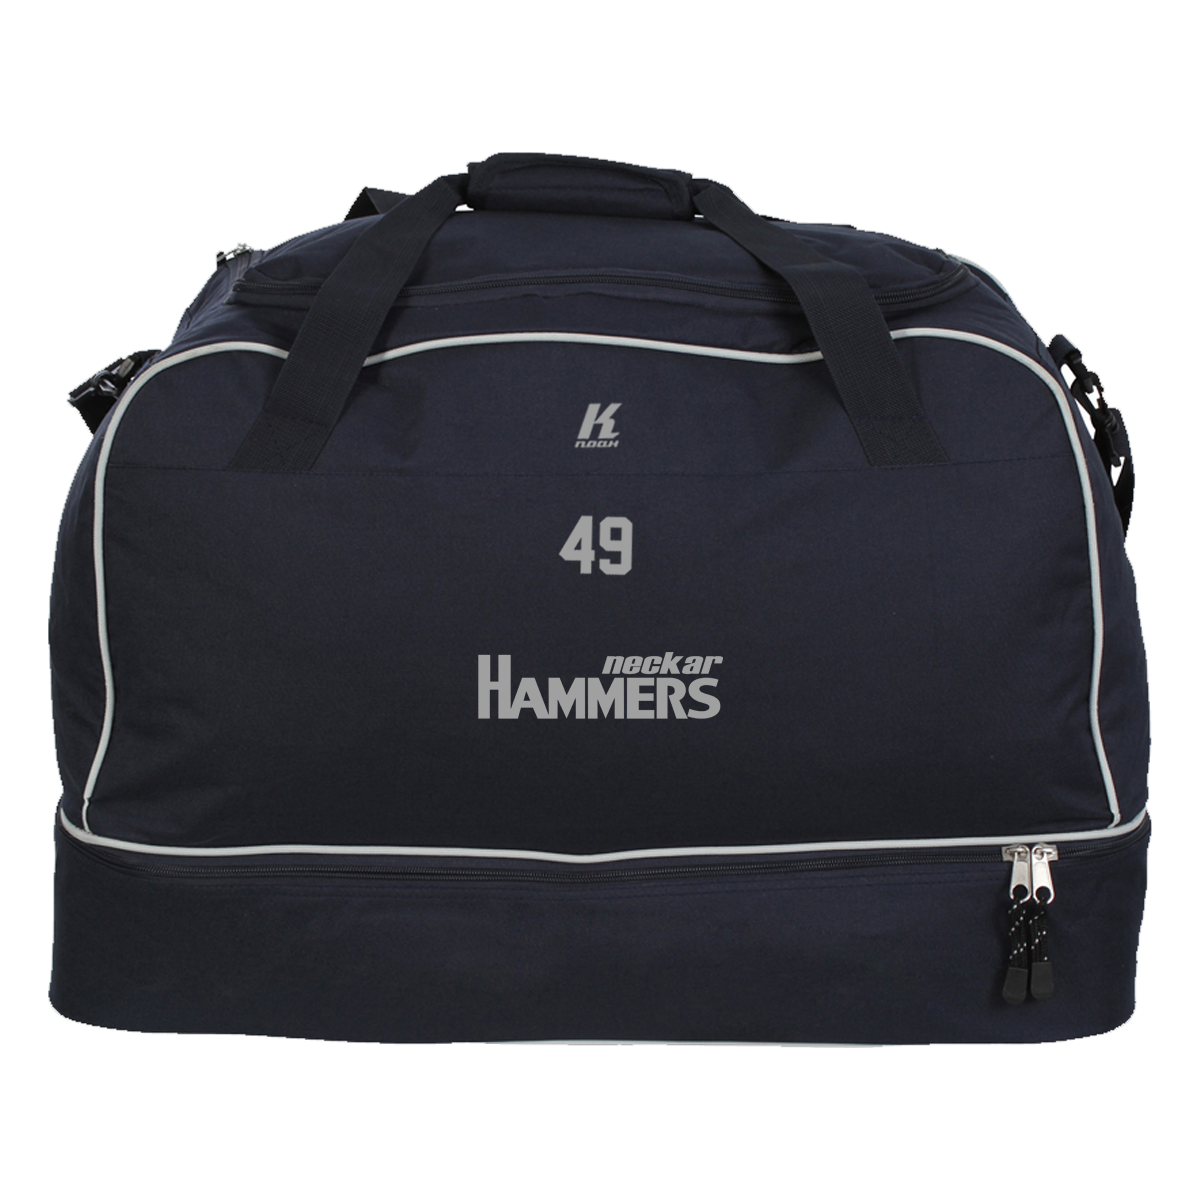 Hammers Players CT Bag with Playernumber or Initials